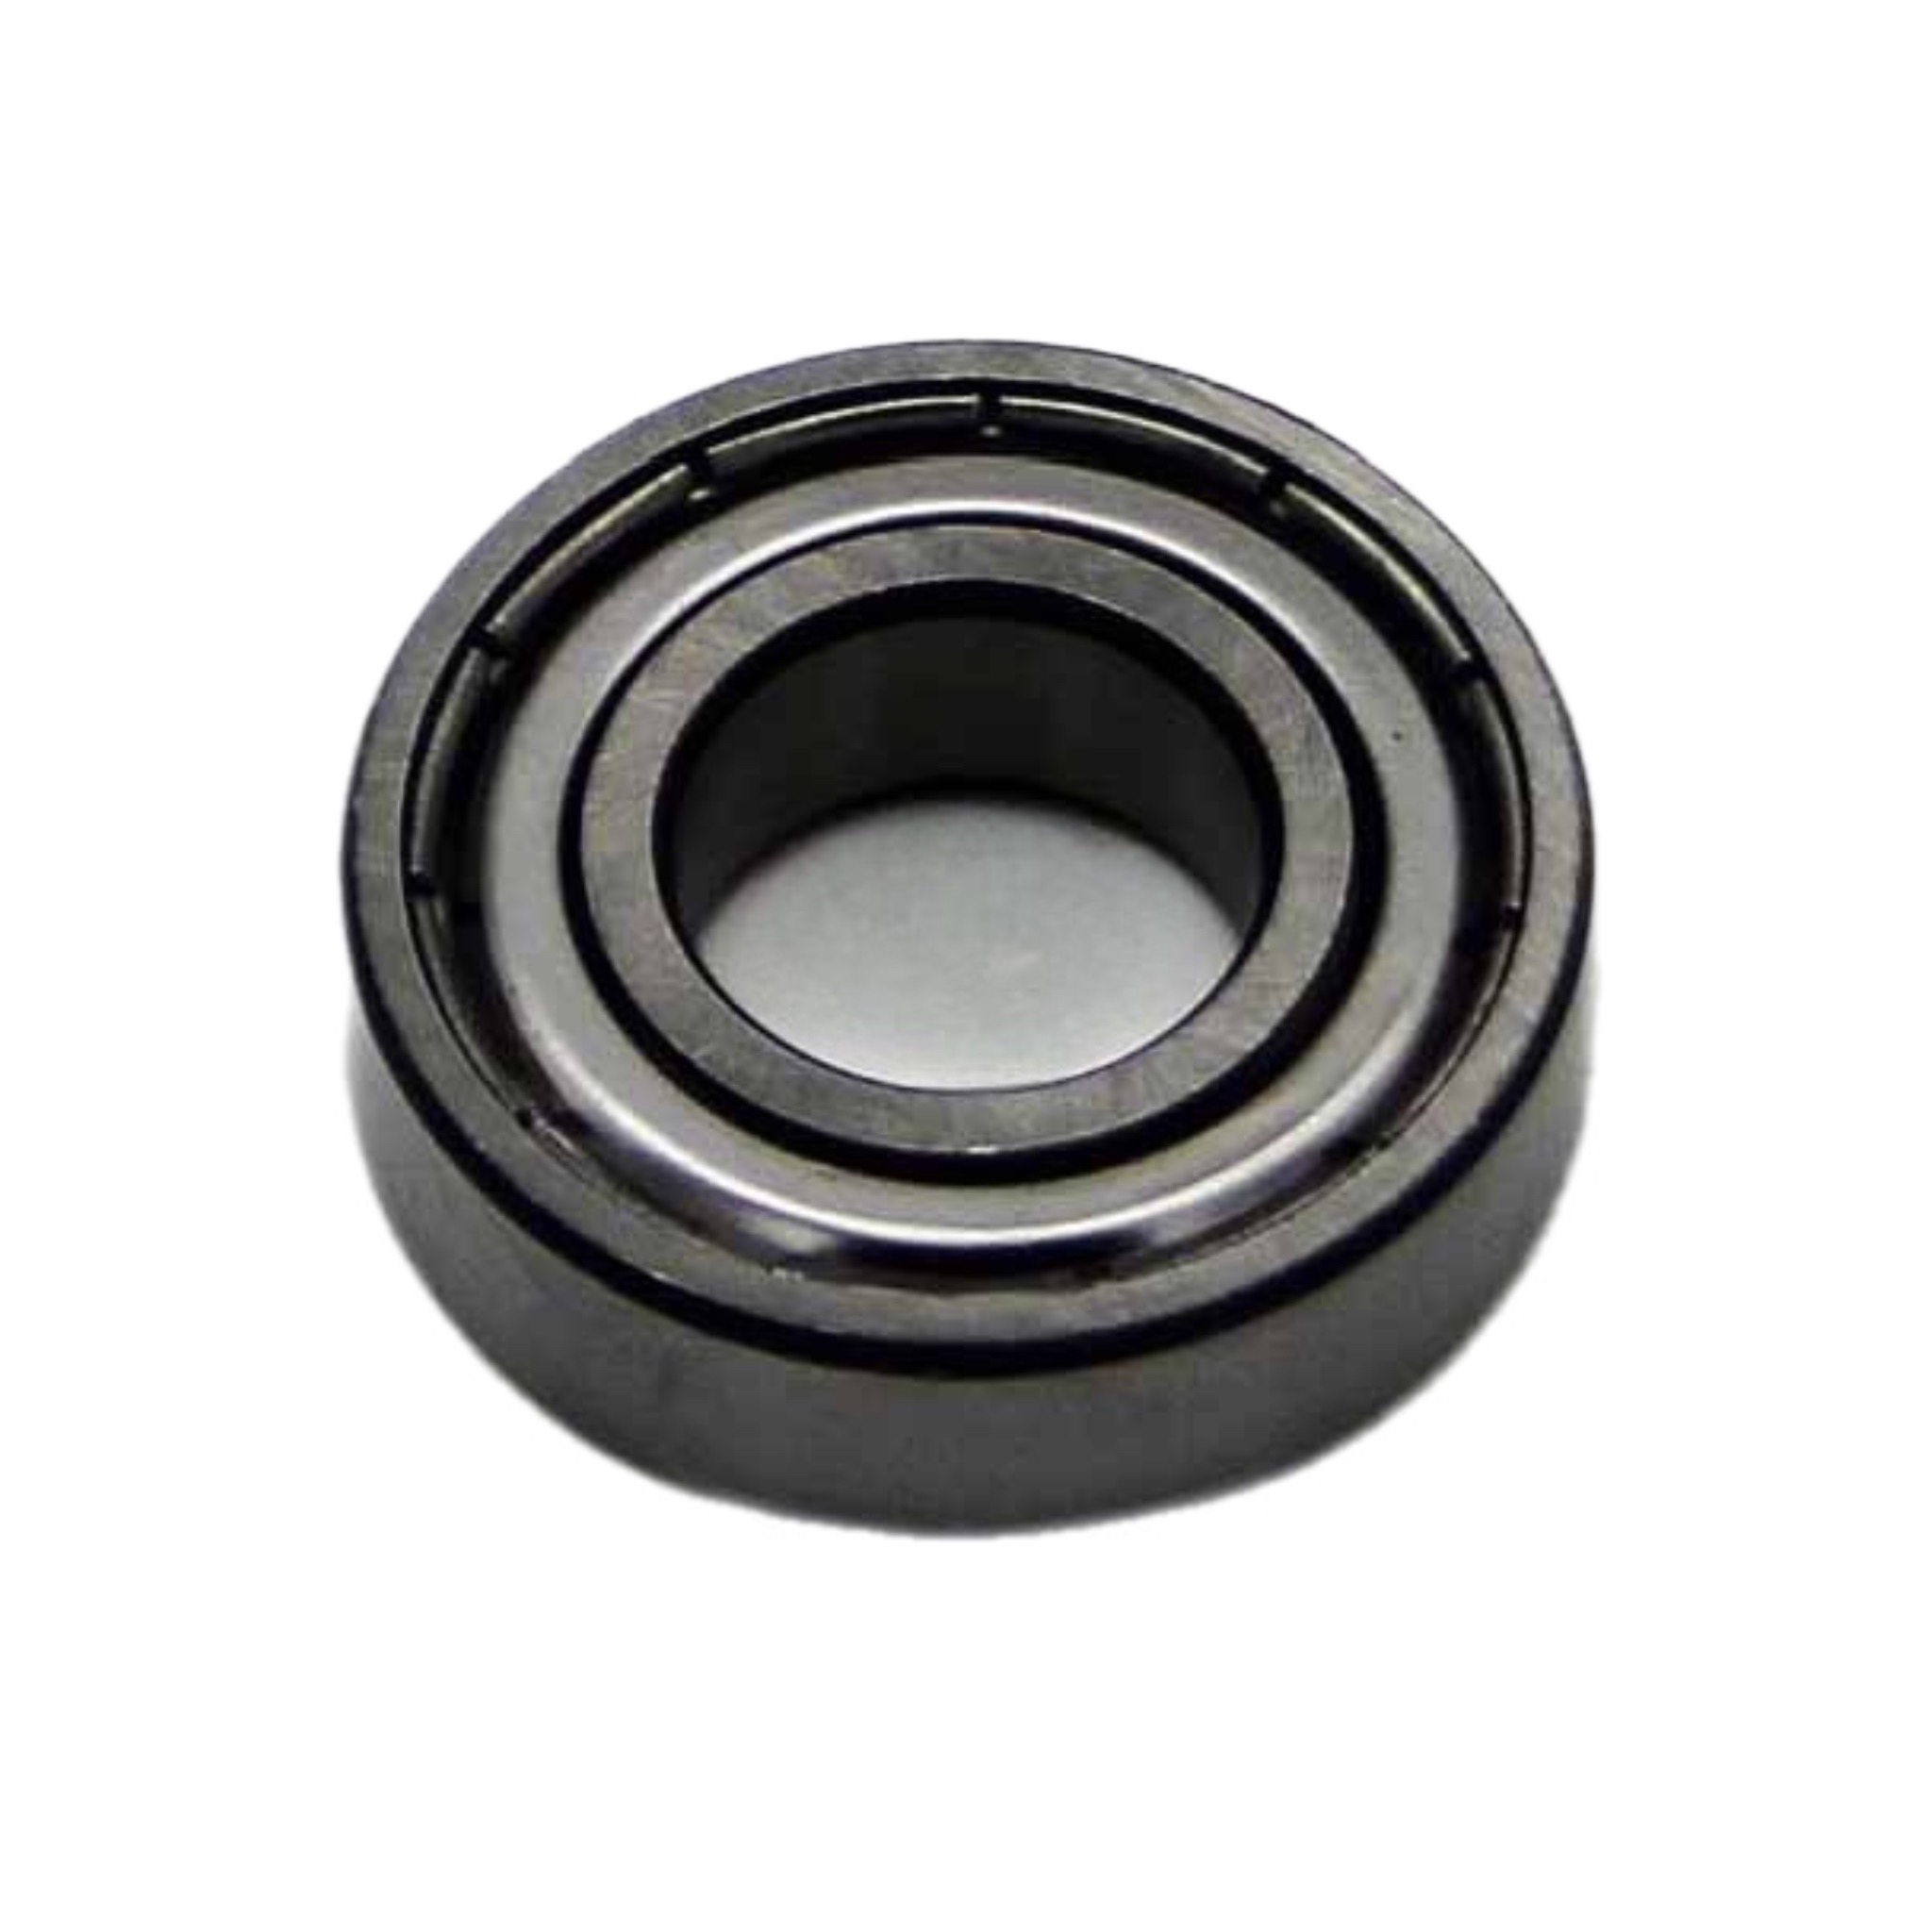 Подшипник барабана OEM 6206 ZZ corrosion resistance of 316l stainless steel deep groove ball bearing 6200 6201 6202 6203 6204 6205 6206 stand wear and tear